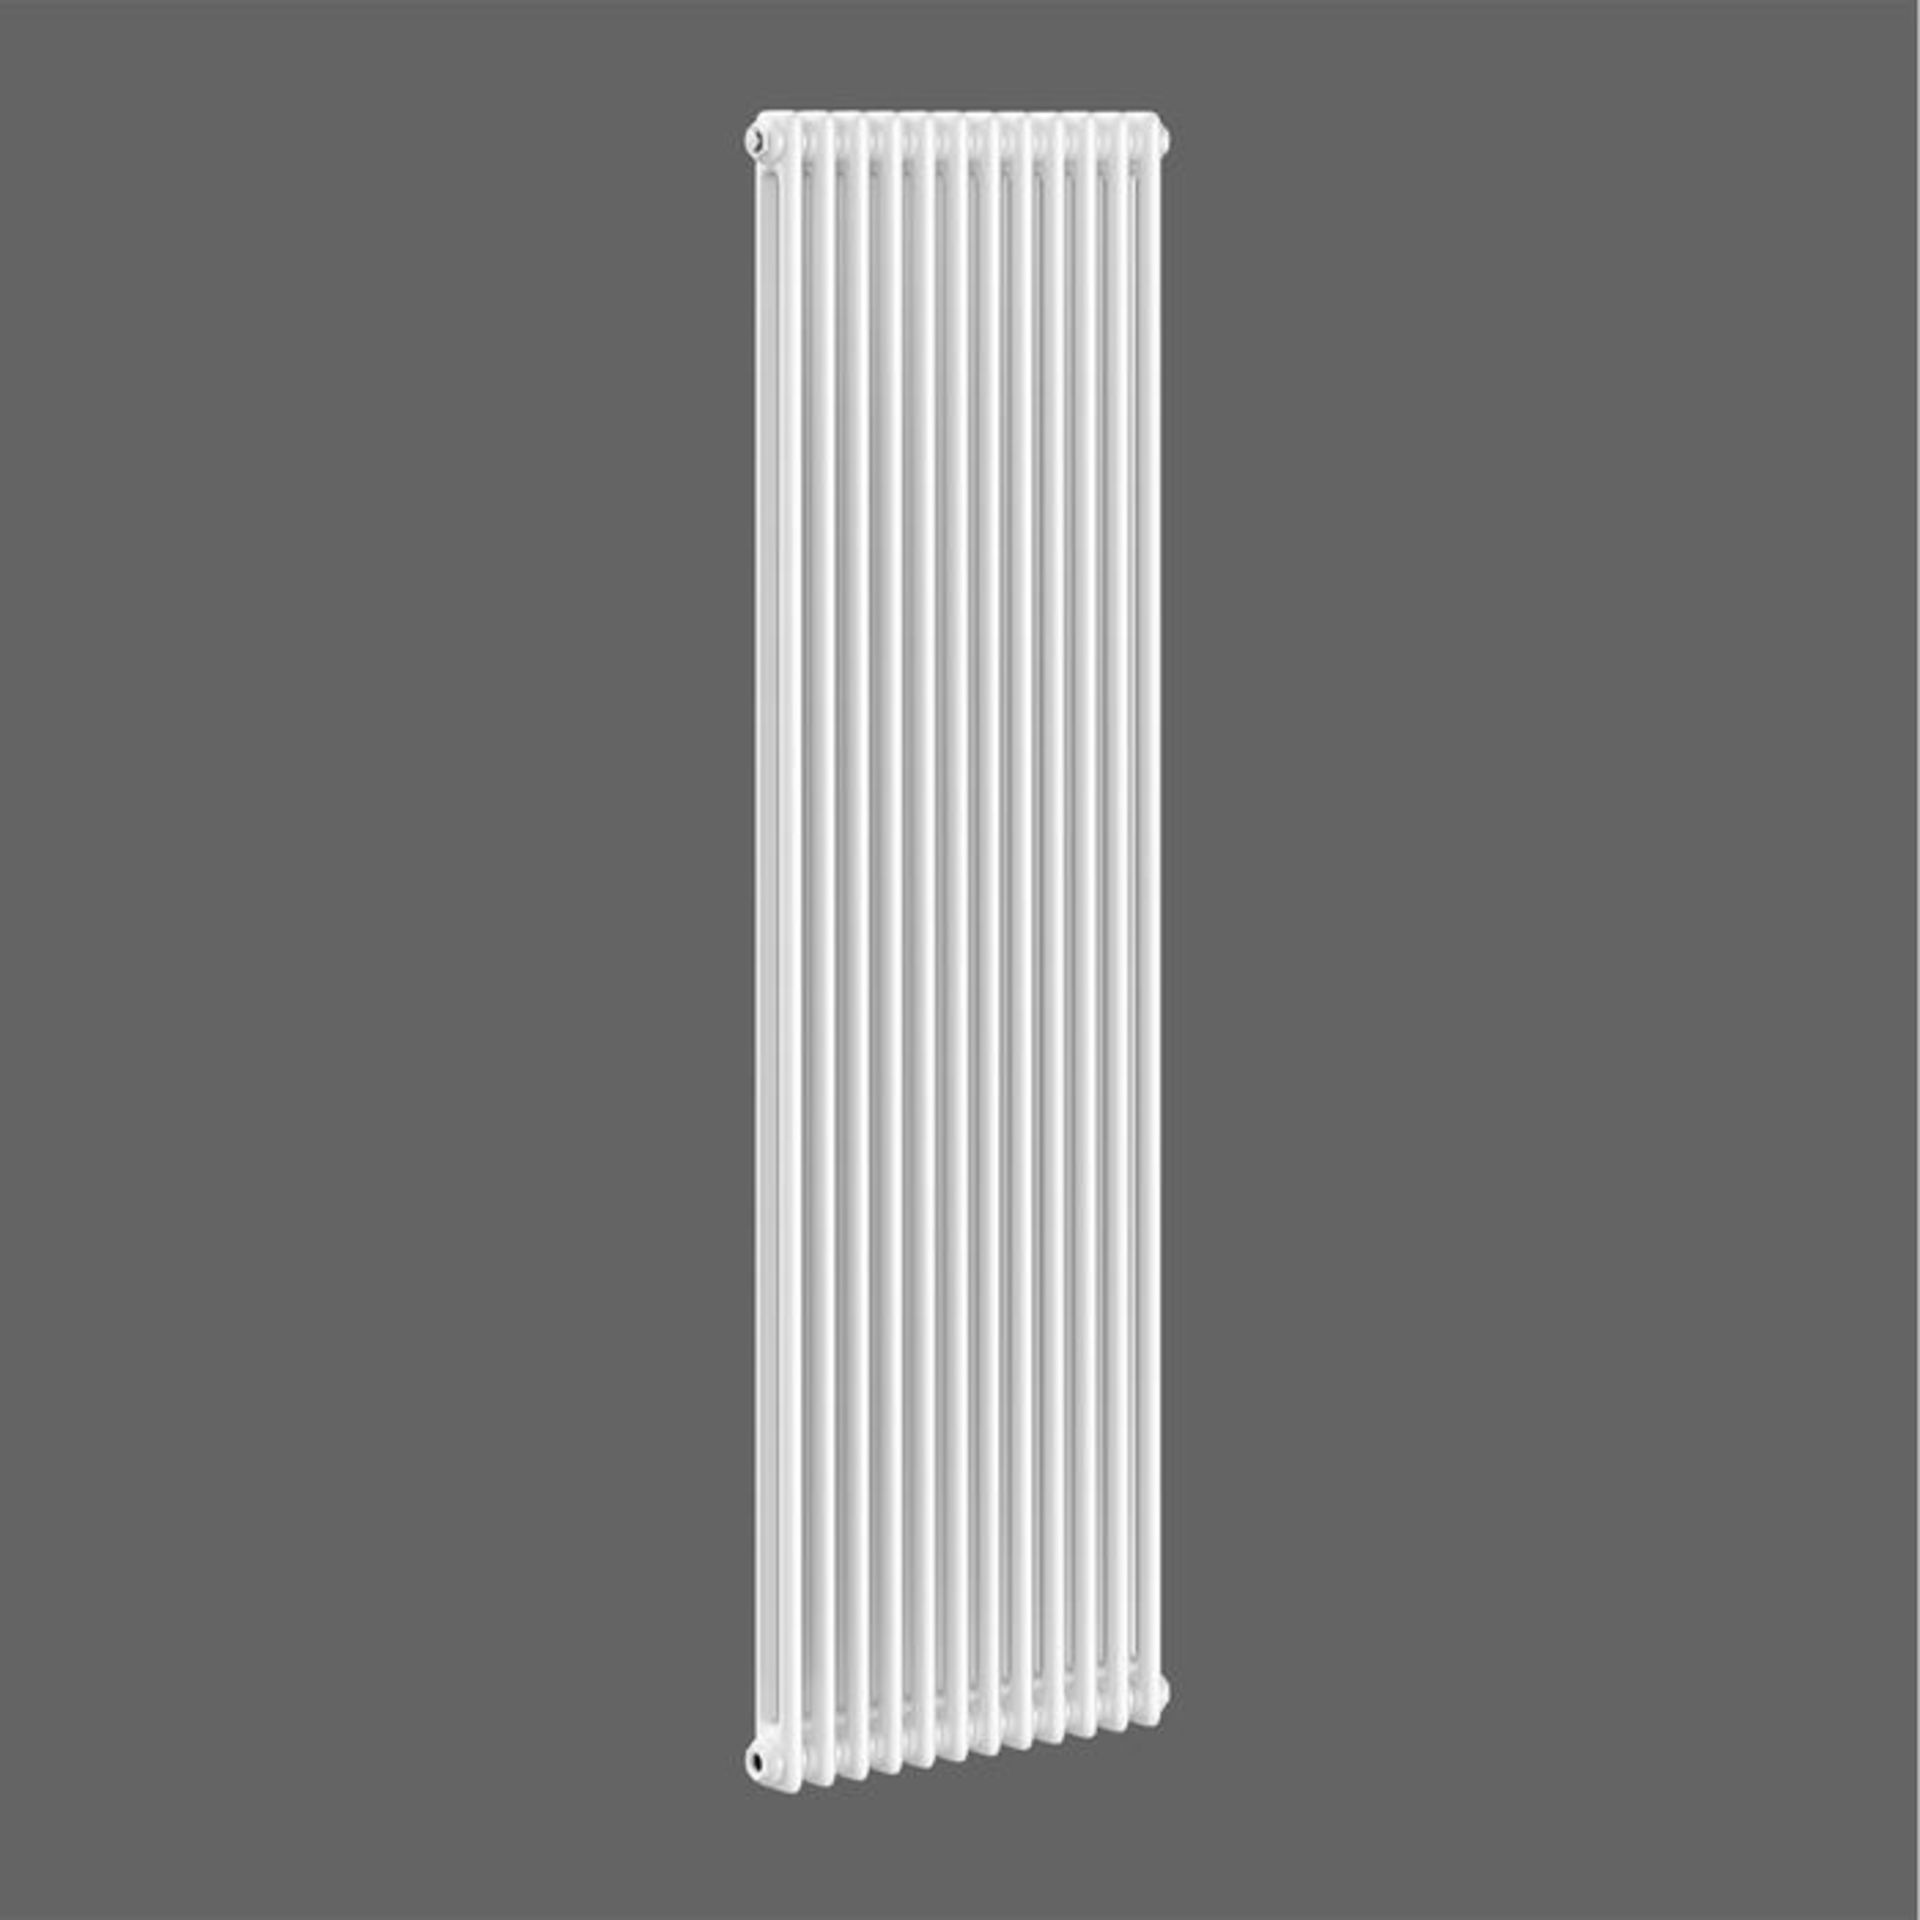 (Y37) 1800x554mm White Double Panel Vertical Colosseum Traditional Radiator. RRP £339.99. For - Image 3 of 3